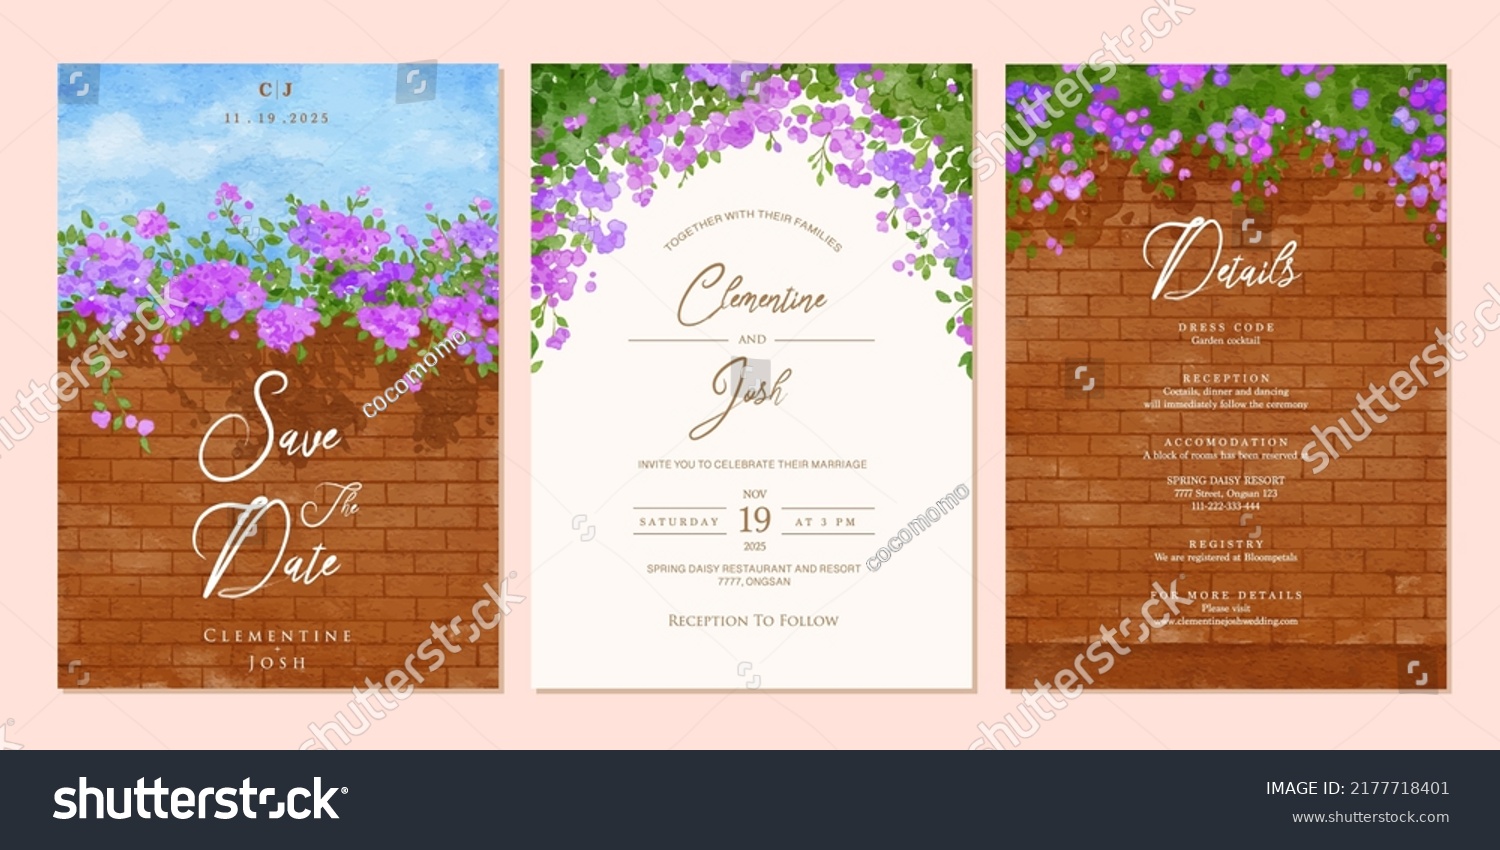 SVG of Set of wedding invitation template with watercolor bougainvillea flower brick wall landscape svg